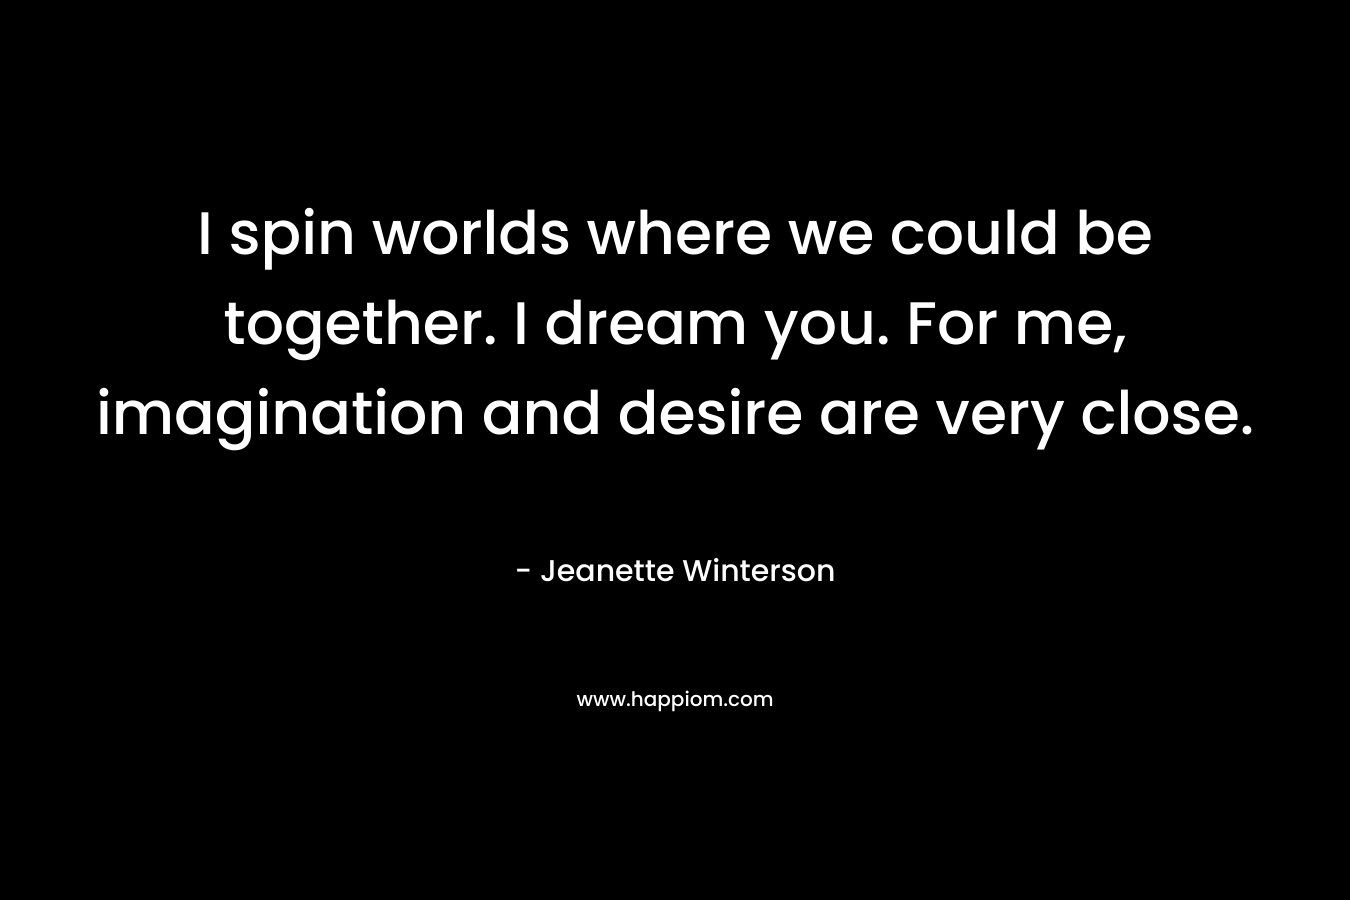 I spin worlds where we could be together. I dream you. For me, imagination and desire are very close. – Jeanette Winterson